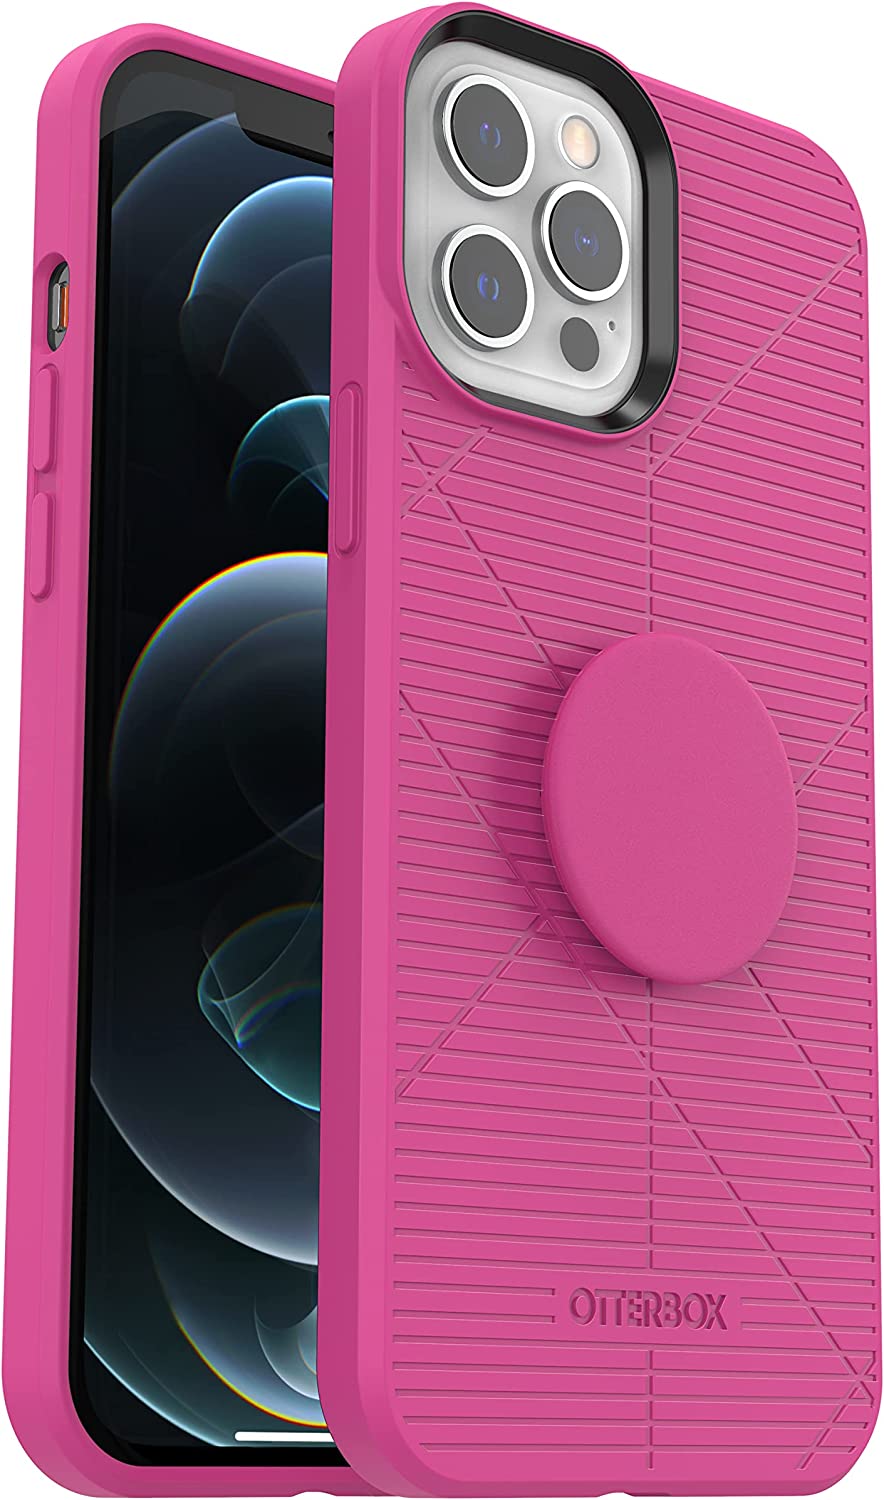 OtterBox Otter+Pop REFLEX SERIES Case for Apple iPhone 12 Pro Max - Pink (New)